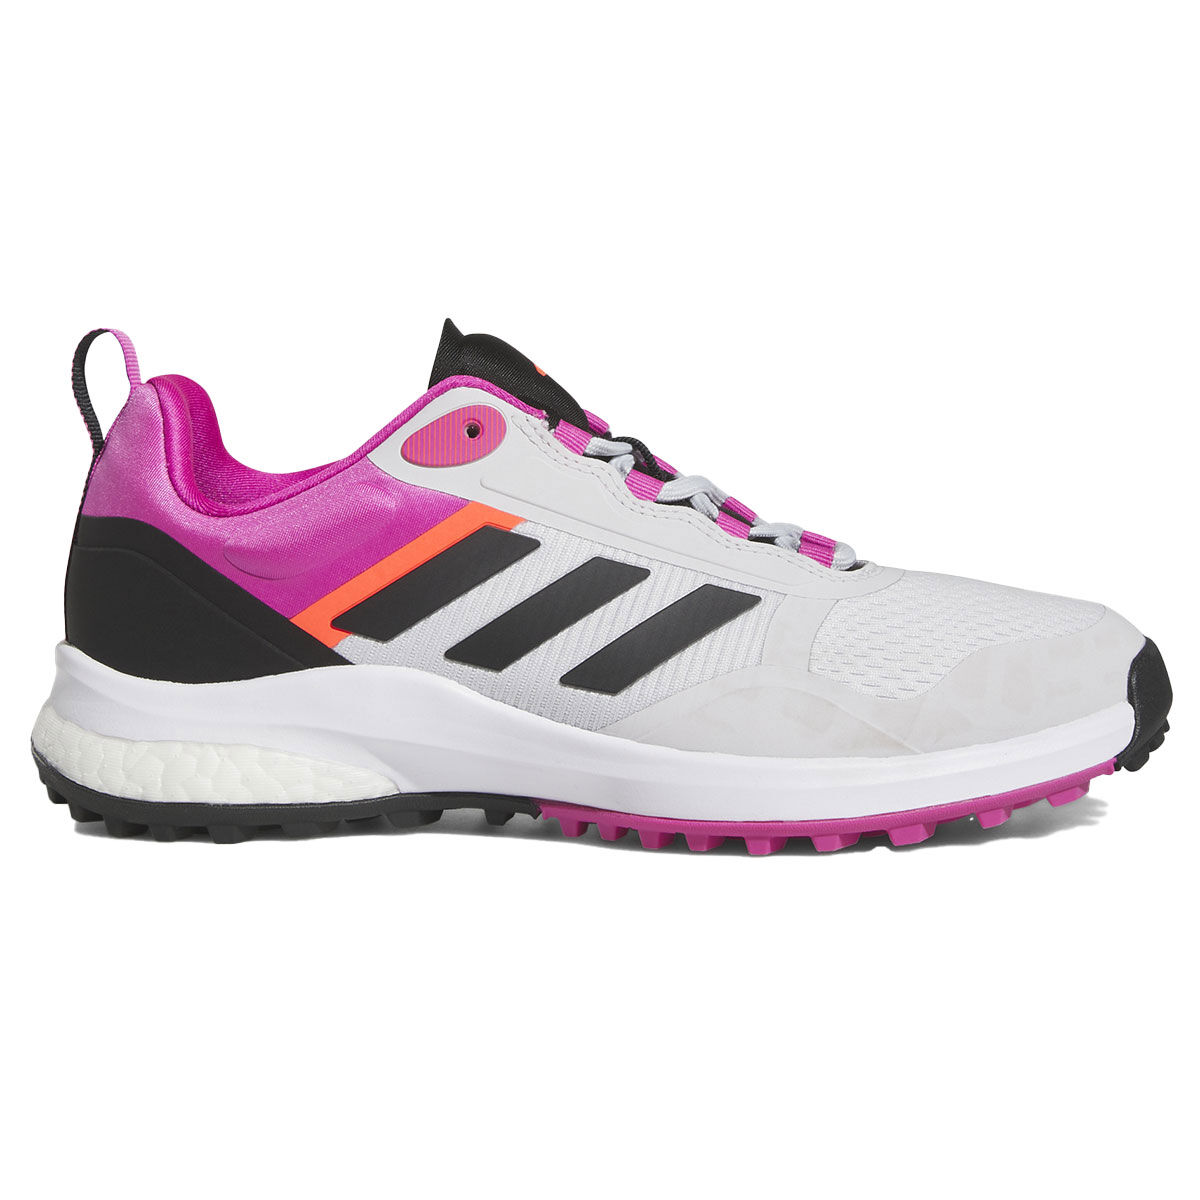 adidas Golf Women’s Grey, Black and Pink Striped Zoysia Spikeless Golf Shoes, Size: 8 | American Golf